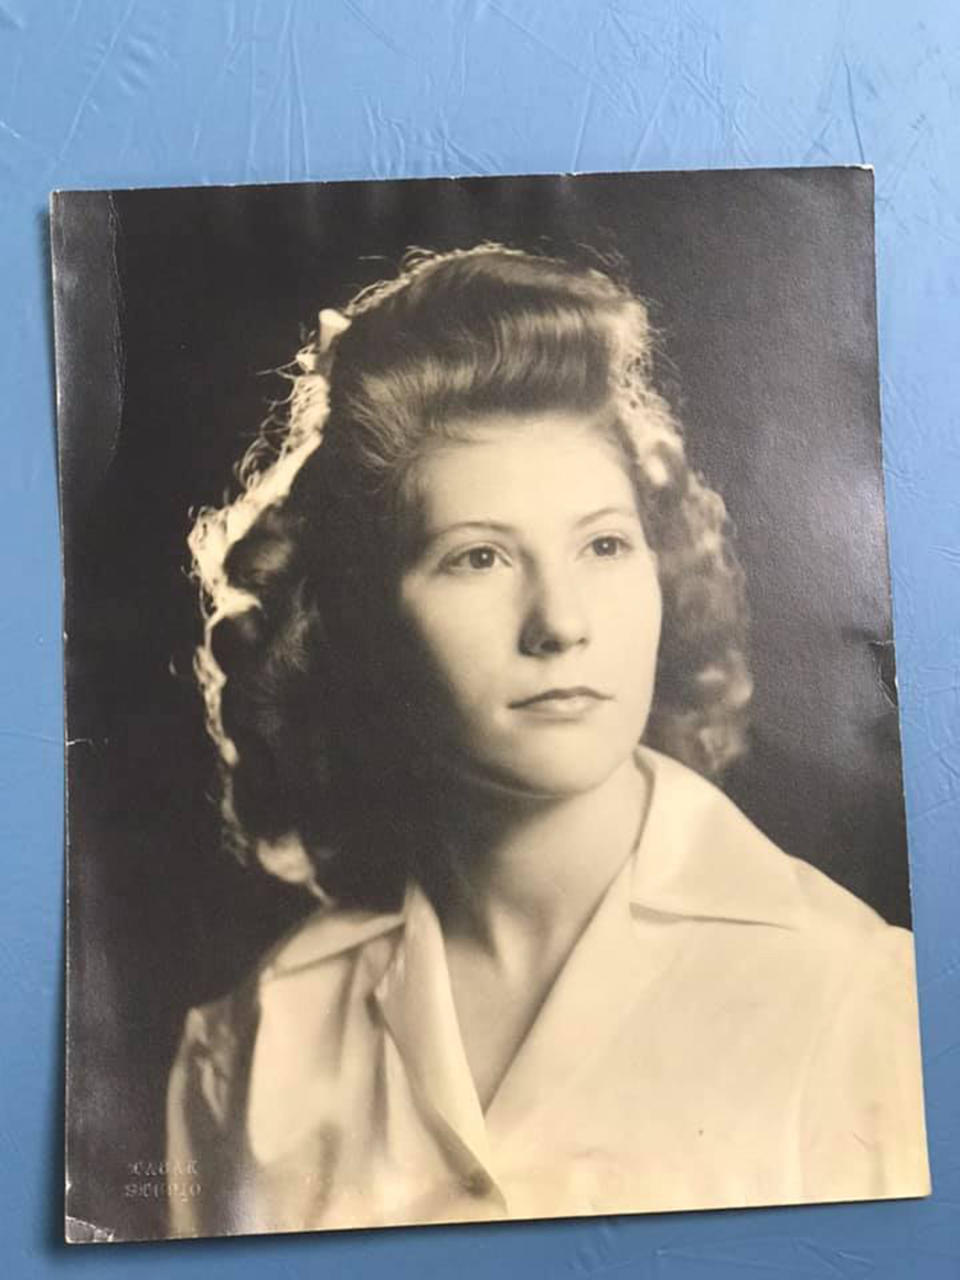 Geneva Wood worked as a maternity ward nurse at nights when she raised her children. Then she got a master's degree in hospital administration. Wood, now 90, always worked hard and that strength continues to help her. (Courtesy the family of Geneva Wood)